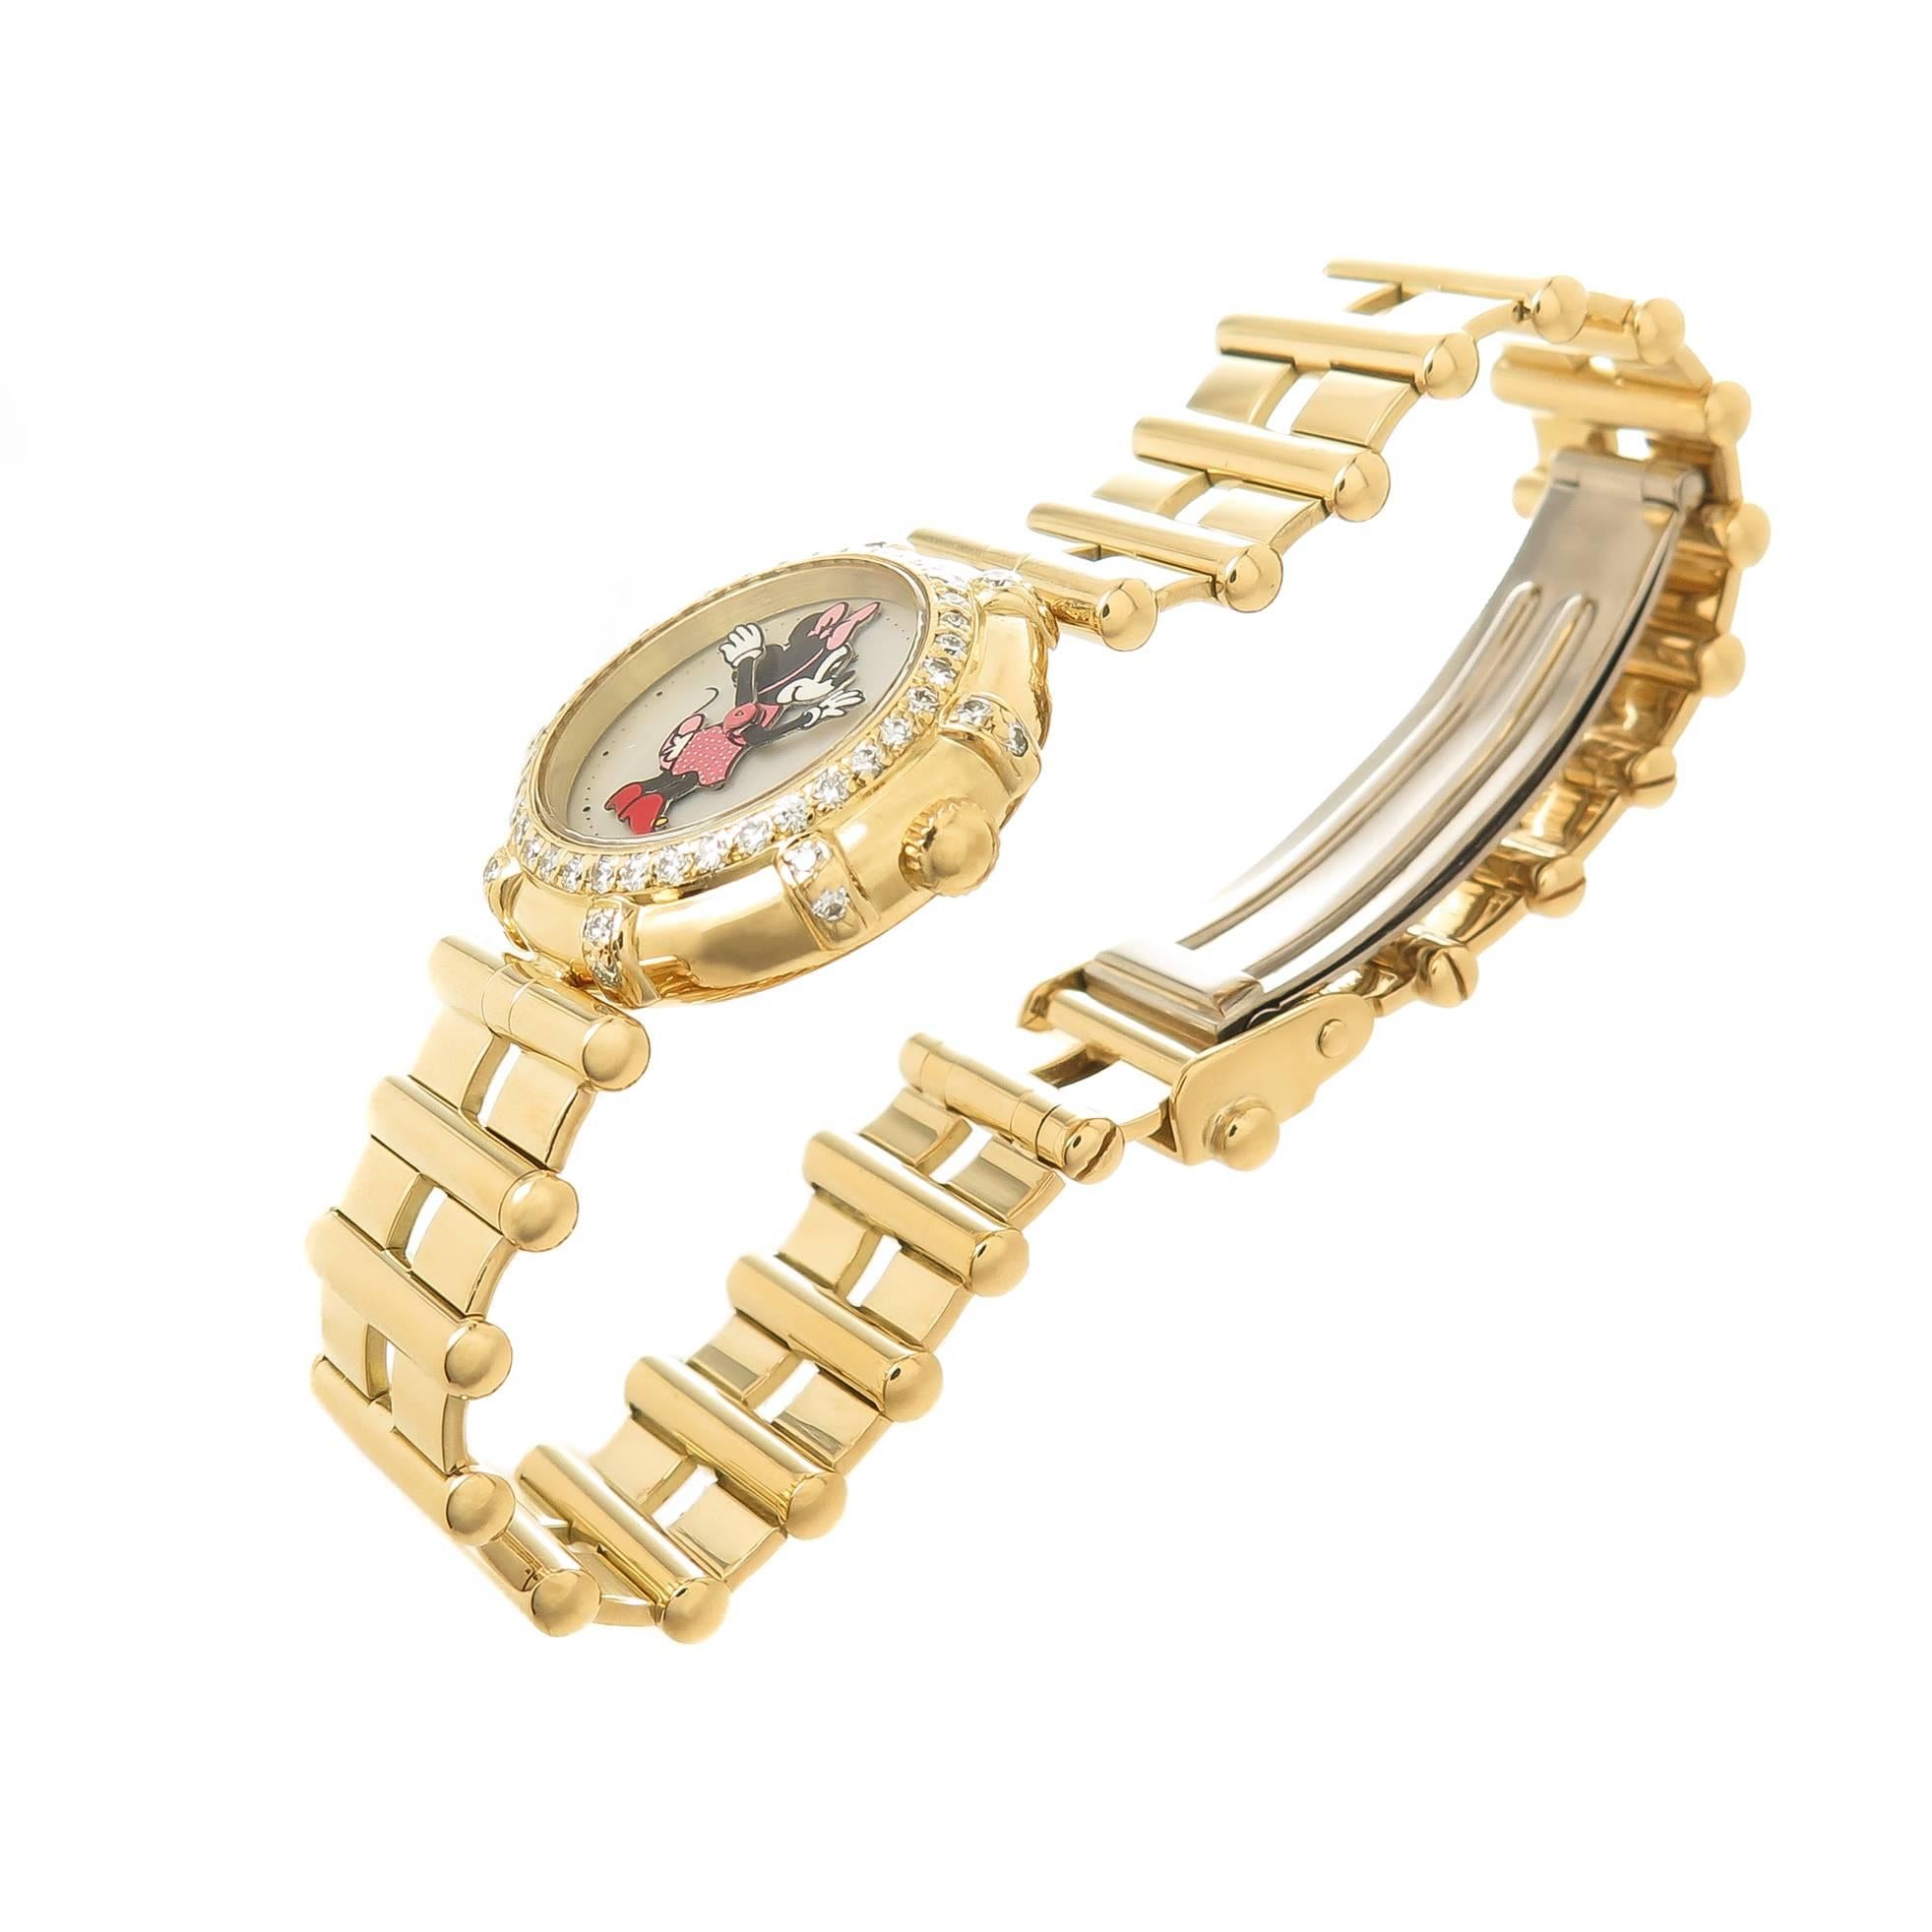 Circa 1990s Gerald Genta 18K yellow Gold Minnie Mouse Wrist watch, measuring 23 MM in Diameter, Diamond Bezel set with Round Brilliant Cuts totaling 1 carat and Grading as F-G in color and VS in clarity. Quartz Movement, White Mother of Pearl dial